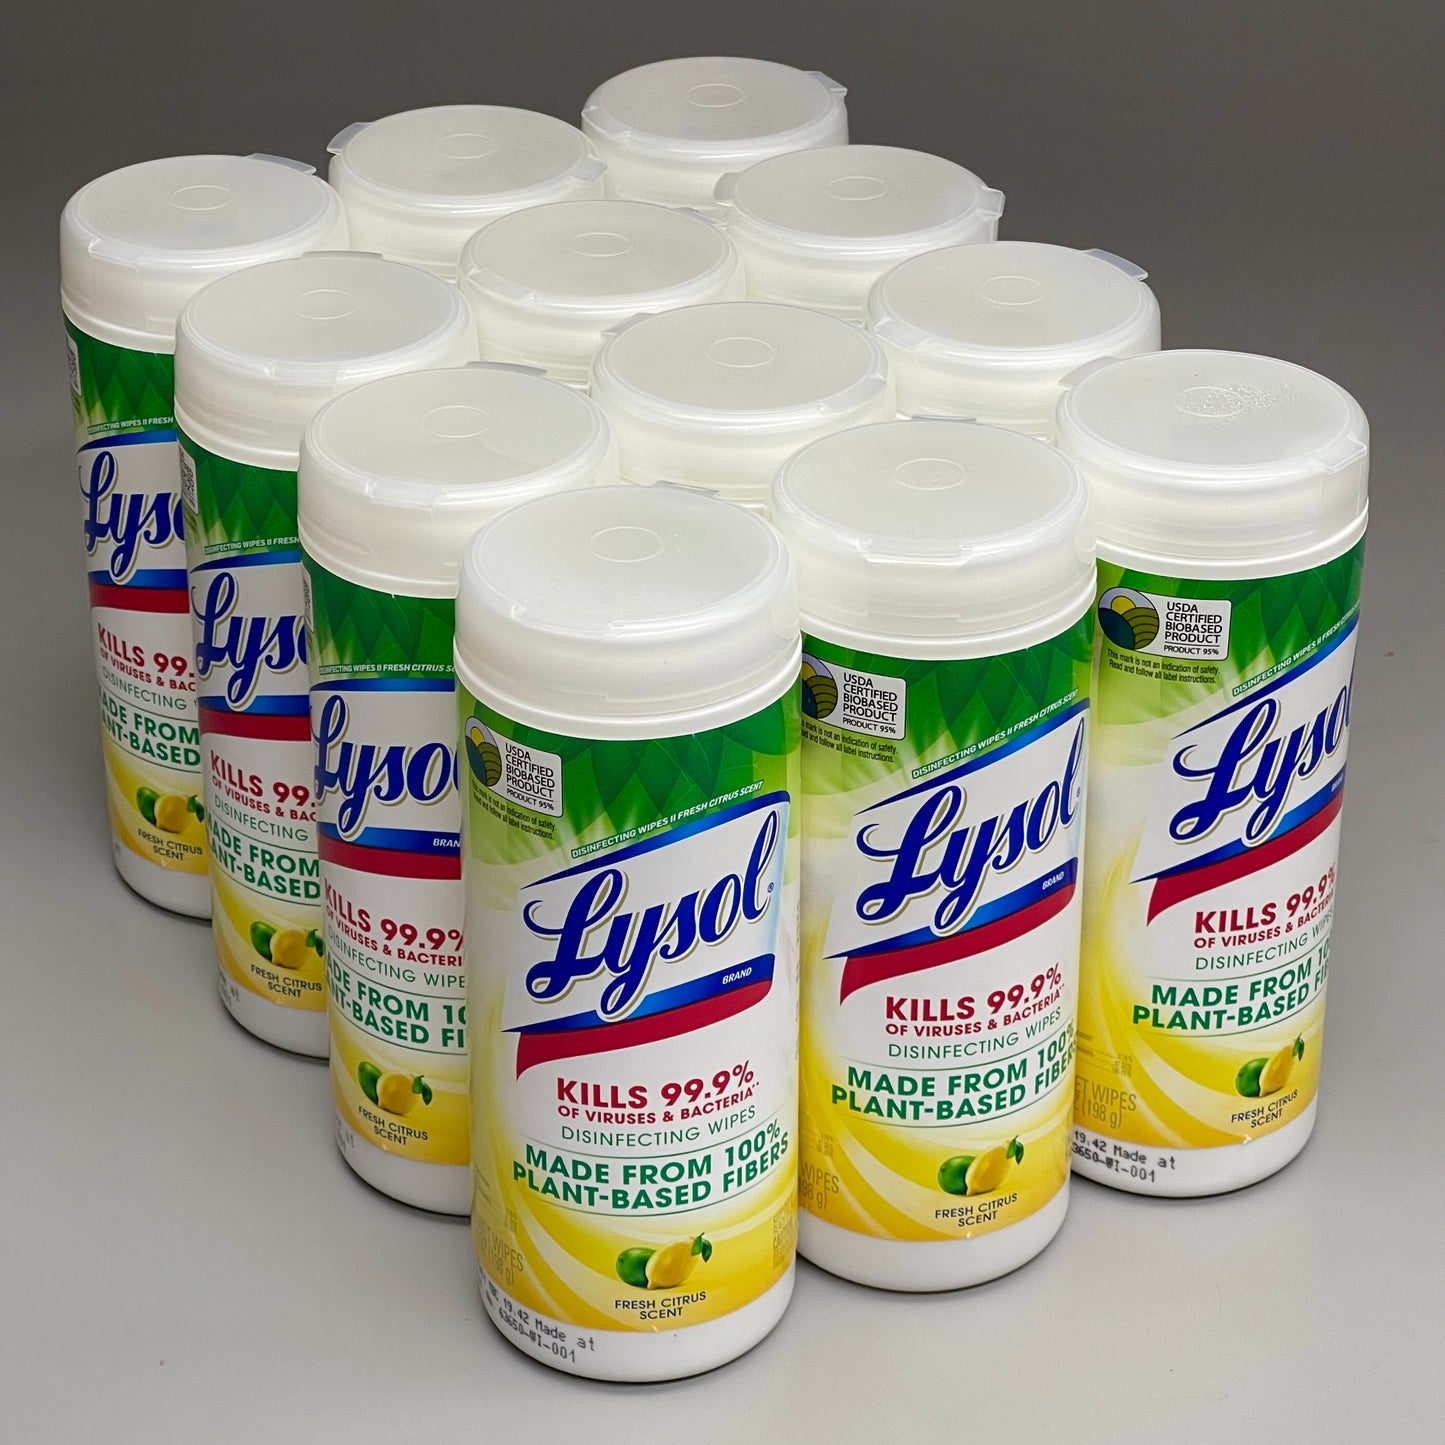 LYSOL 12-PACK! Disinfecting Wipes 30 Wet Wipes Each (360 Total) Fresh Citrus Scent 7 oz 3145077